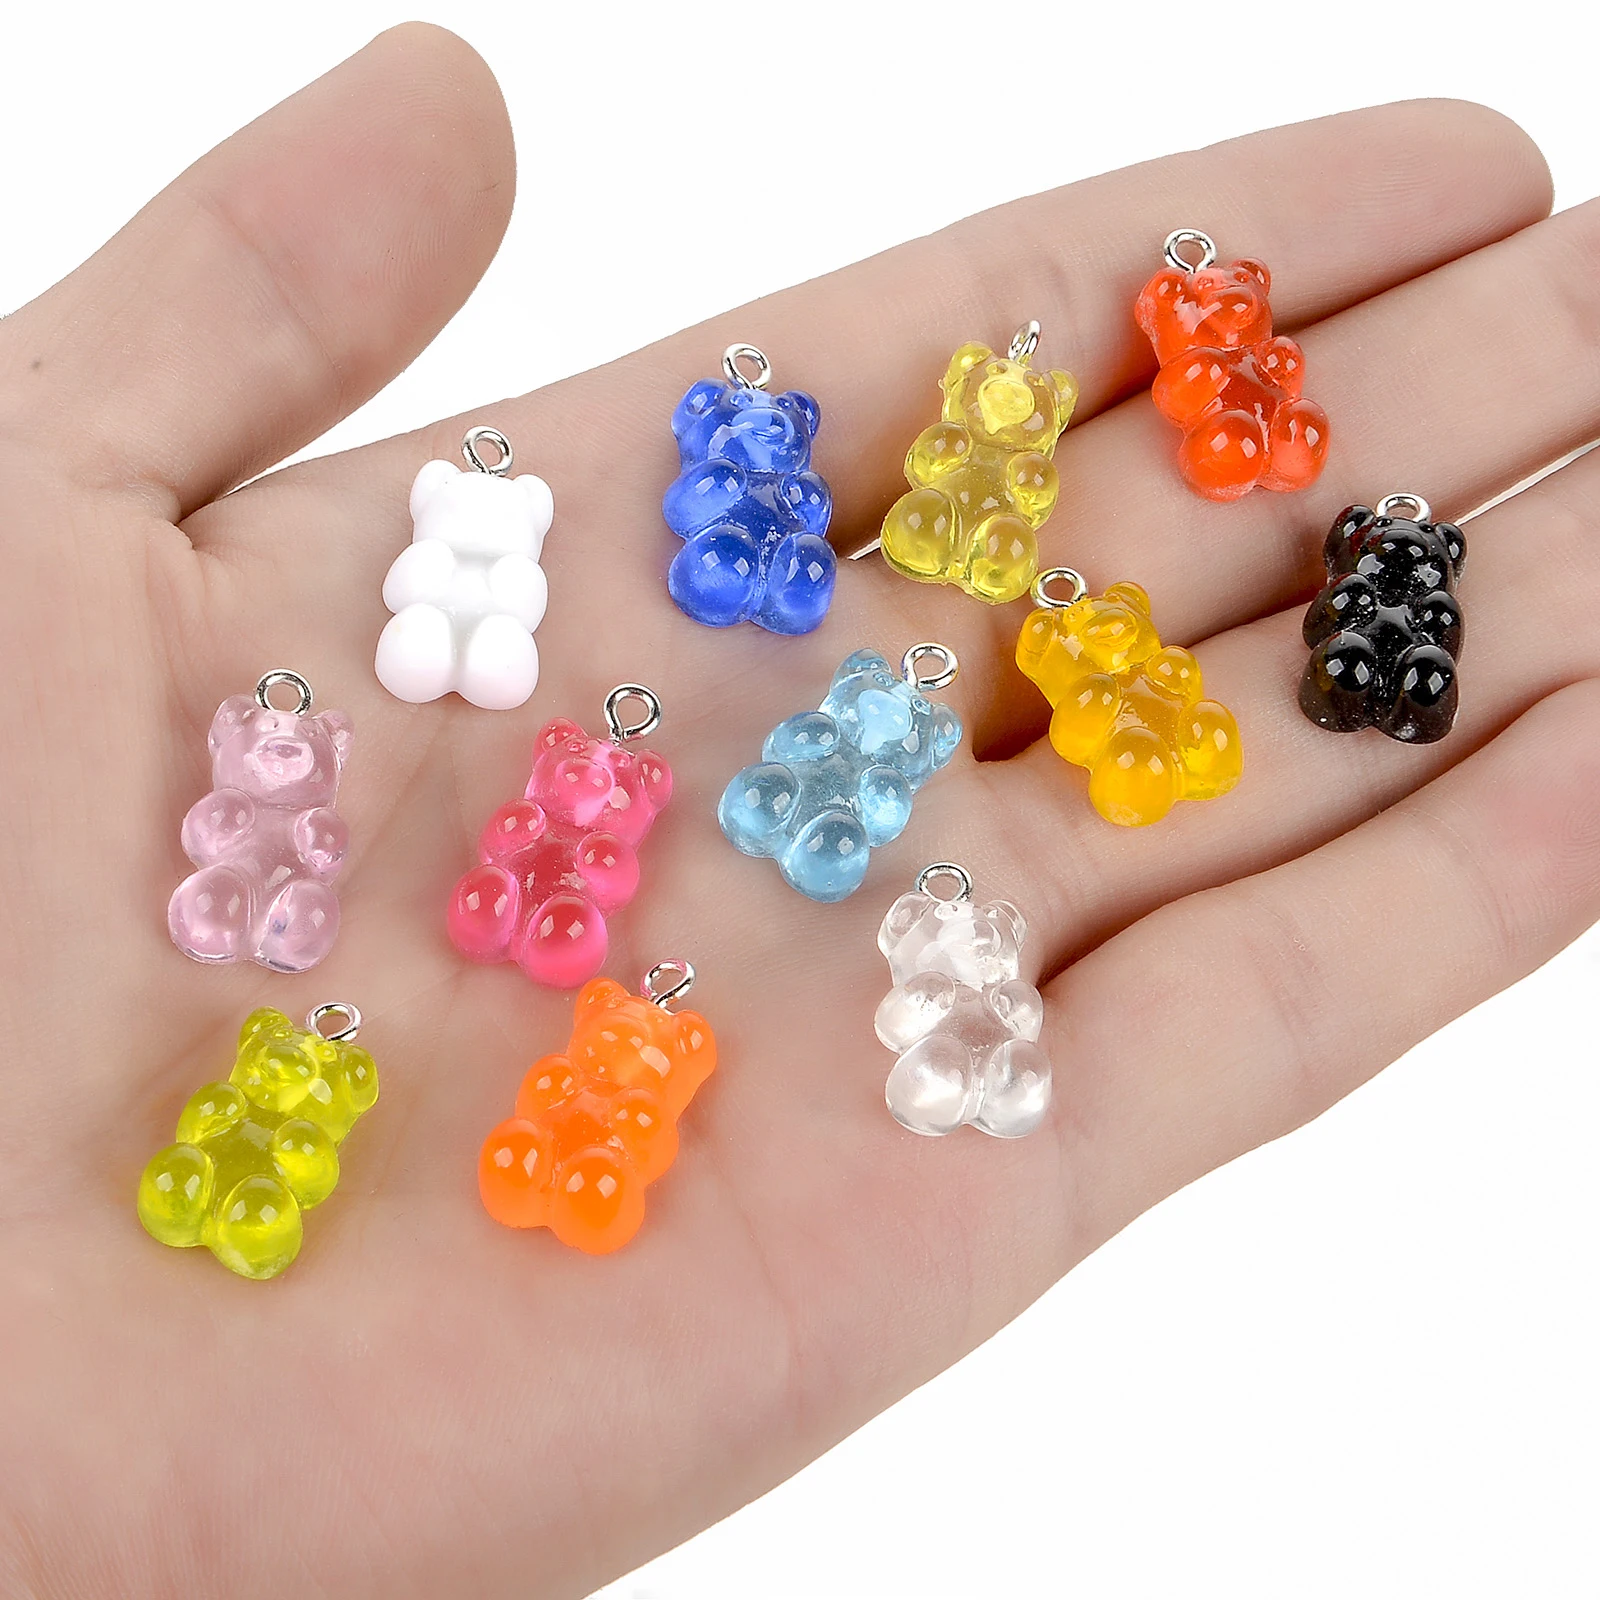 Bling Out Your Nails with These Cute Charms: Gummy Bears & Teddy Bears Bring Nail Art to Life